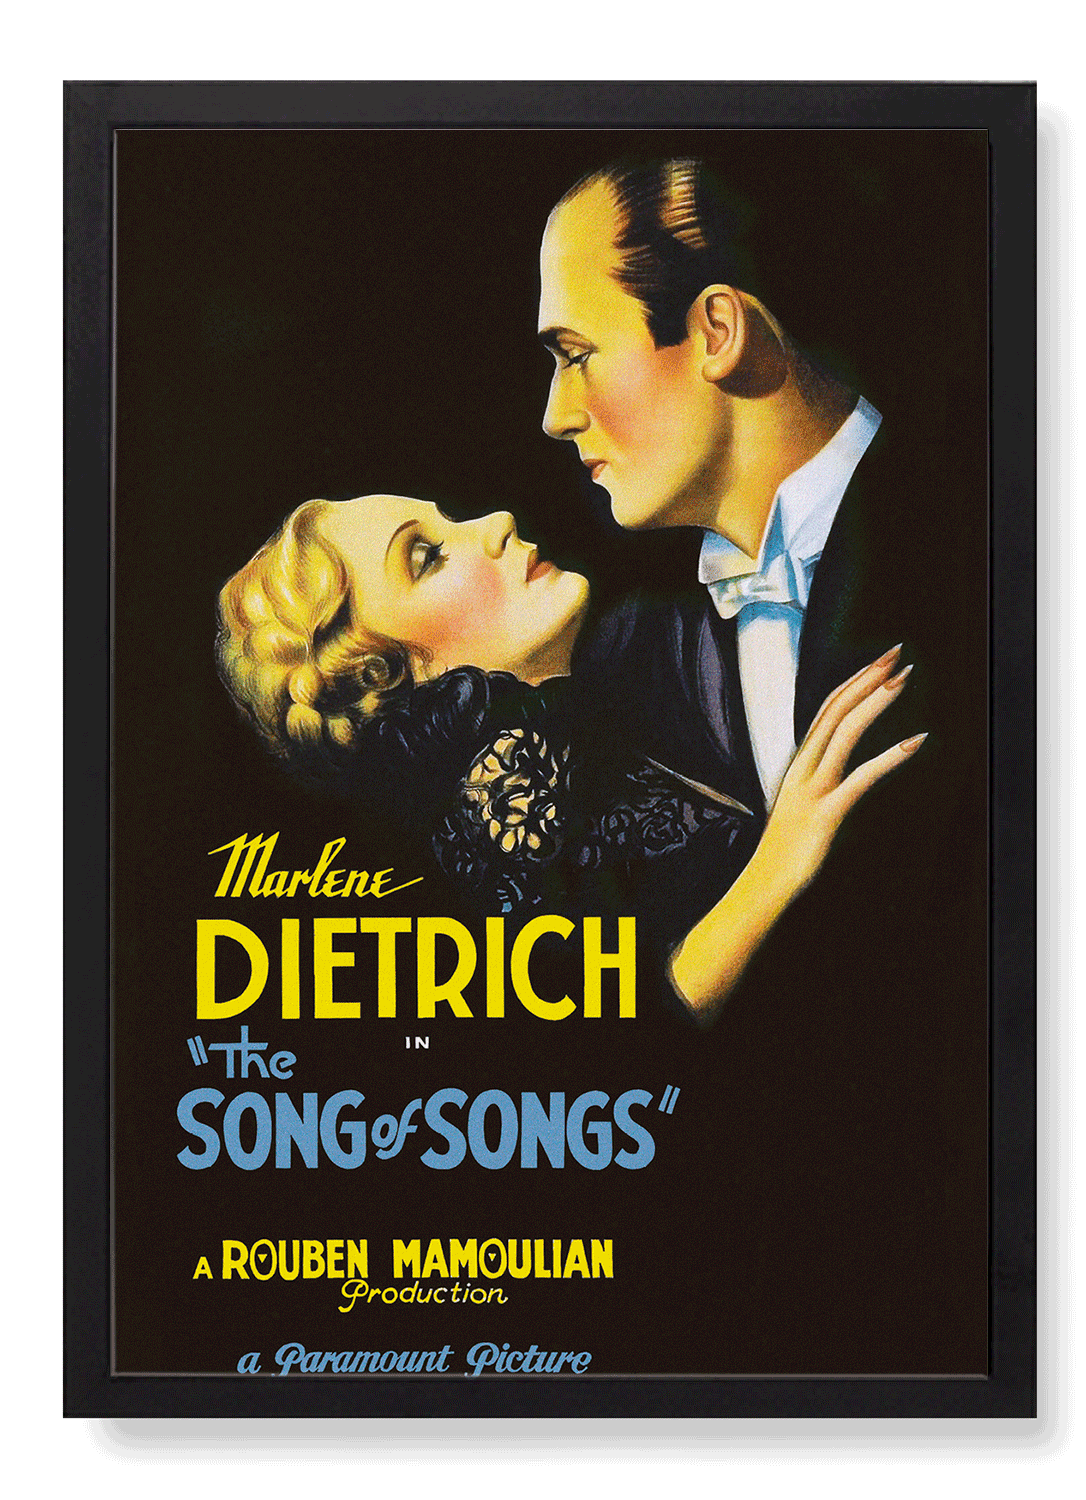 THE SONG OF SONGS (1933)